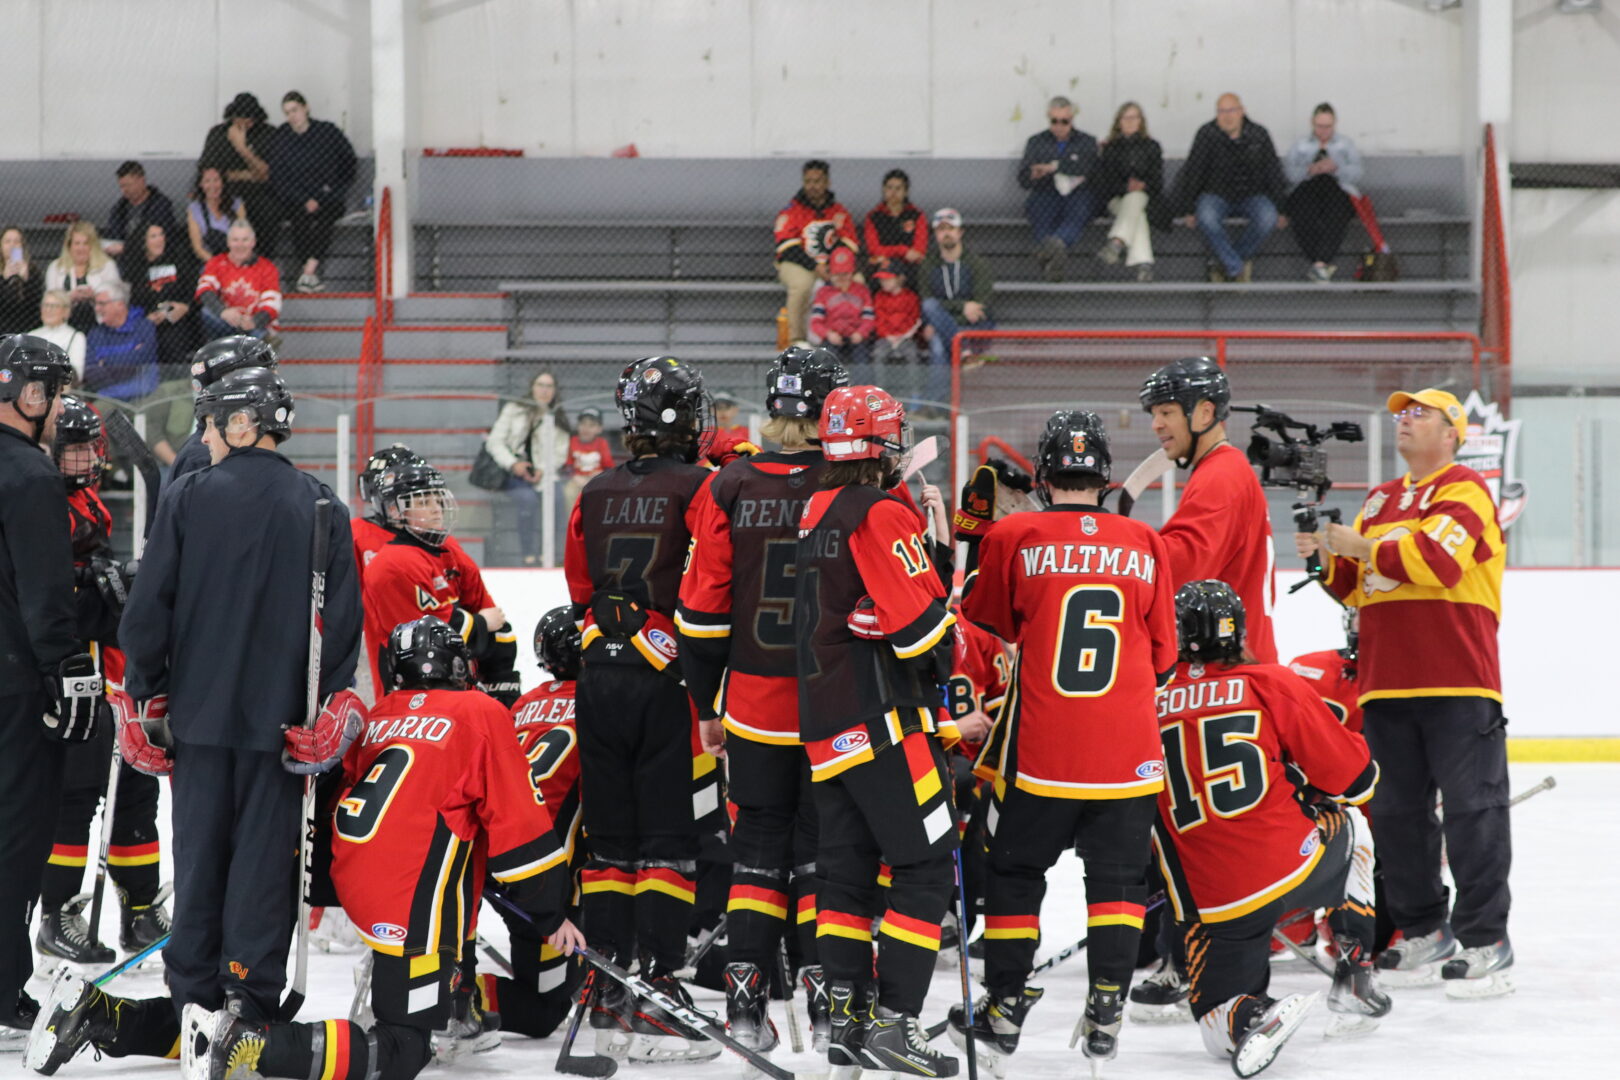 Bow Valley Flames win the chance to practice with long-time Calgary Flame